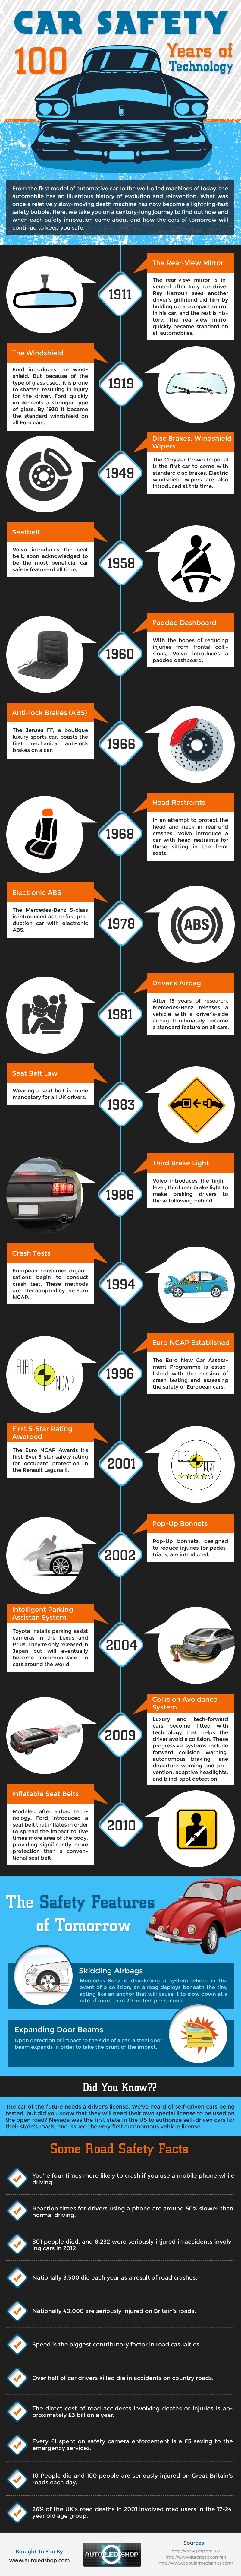 Car Safety 100 Years of Technology